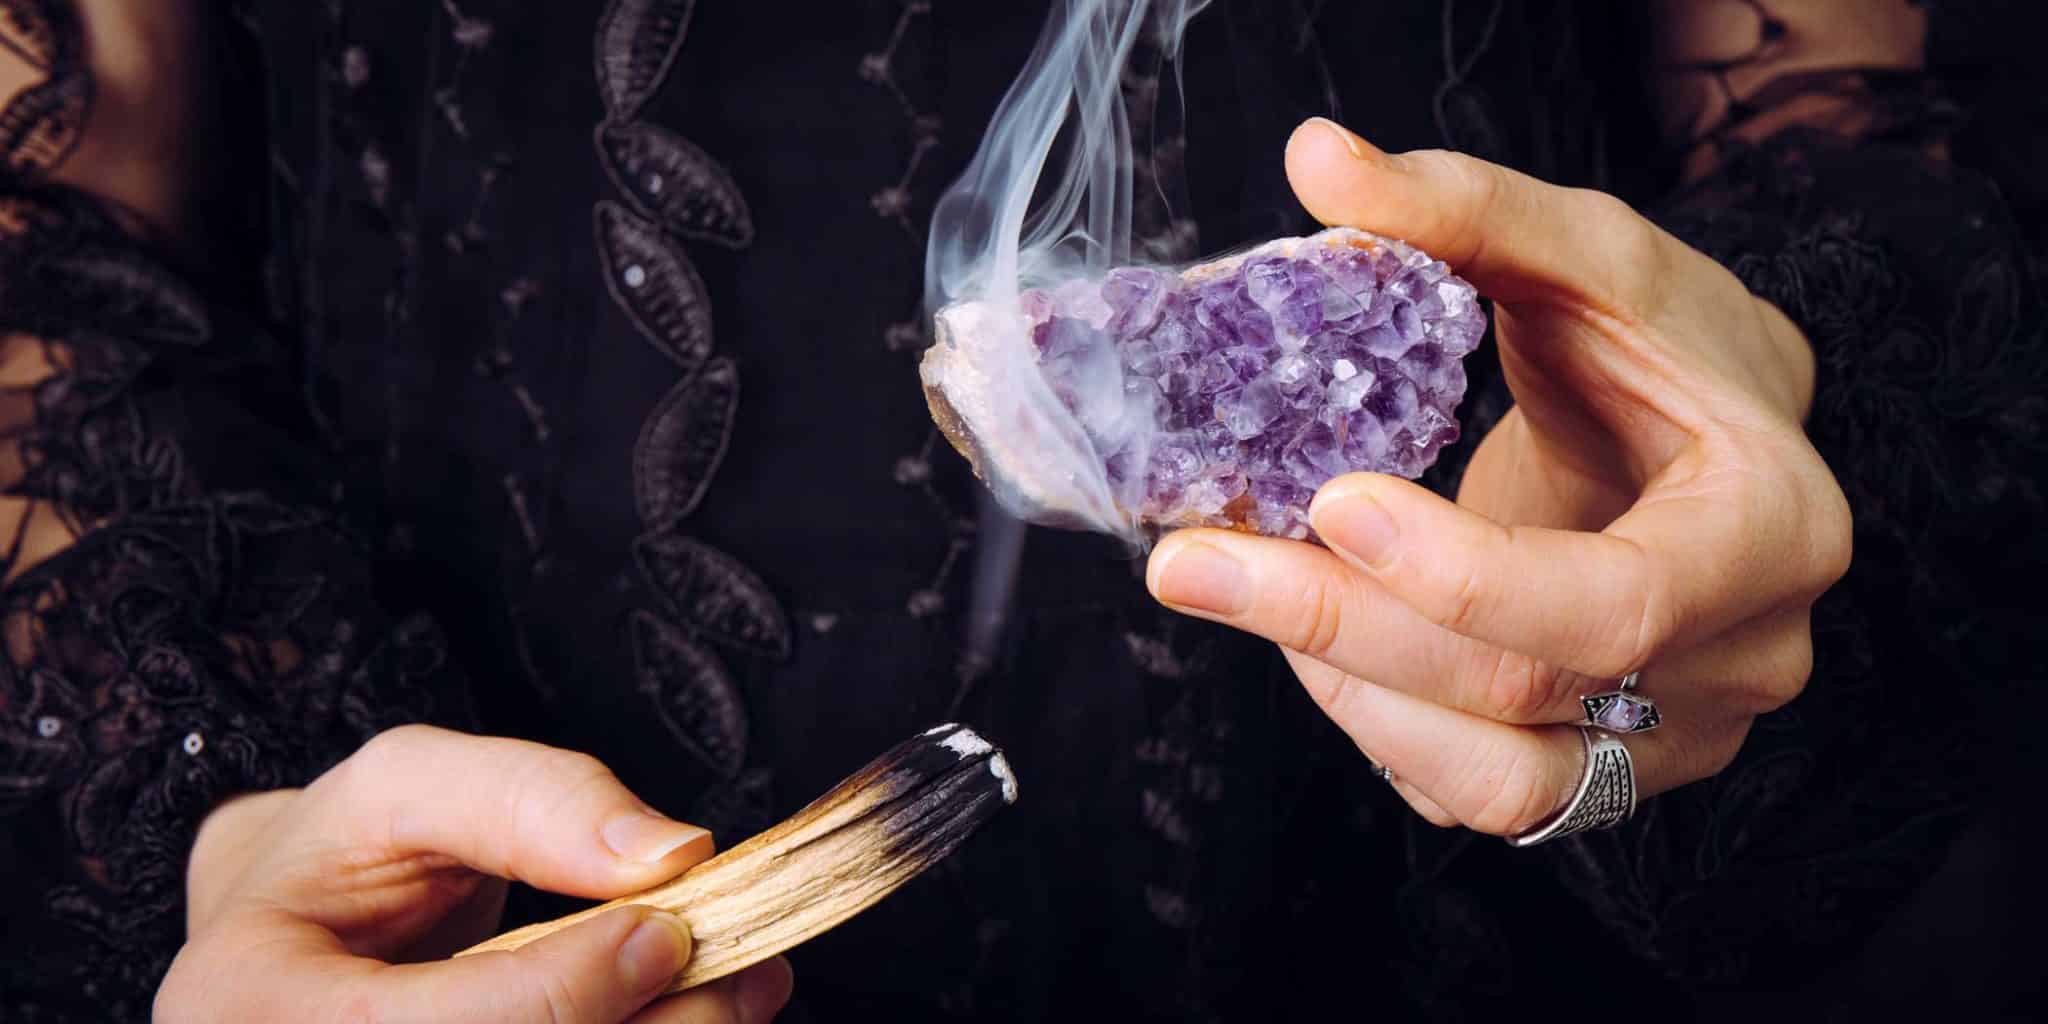 A woman's hand using palo santo to smoke cleanse an amethyst crystal cluster.